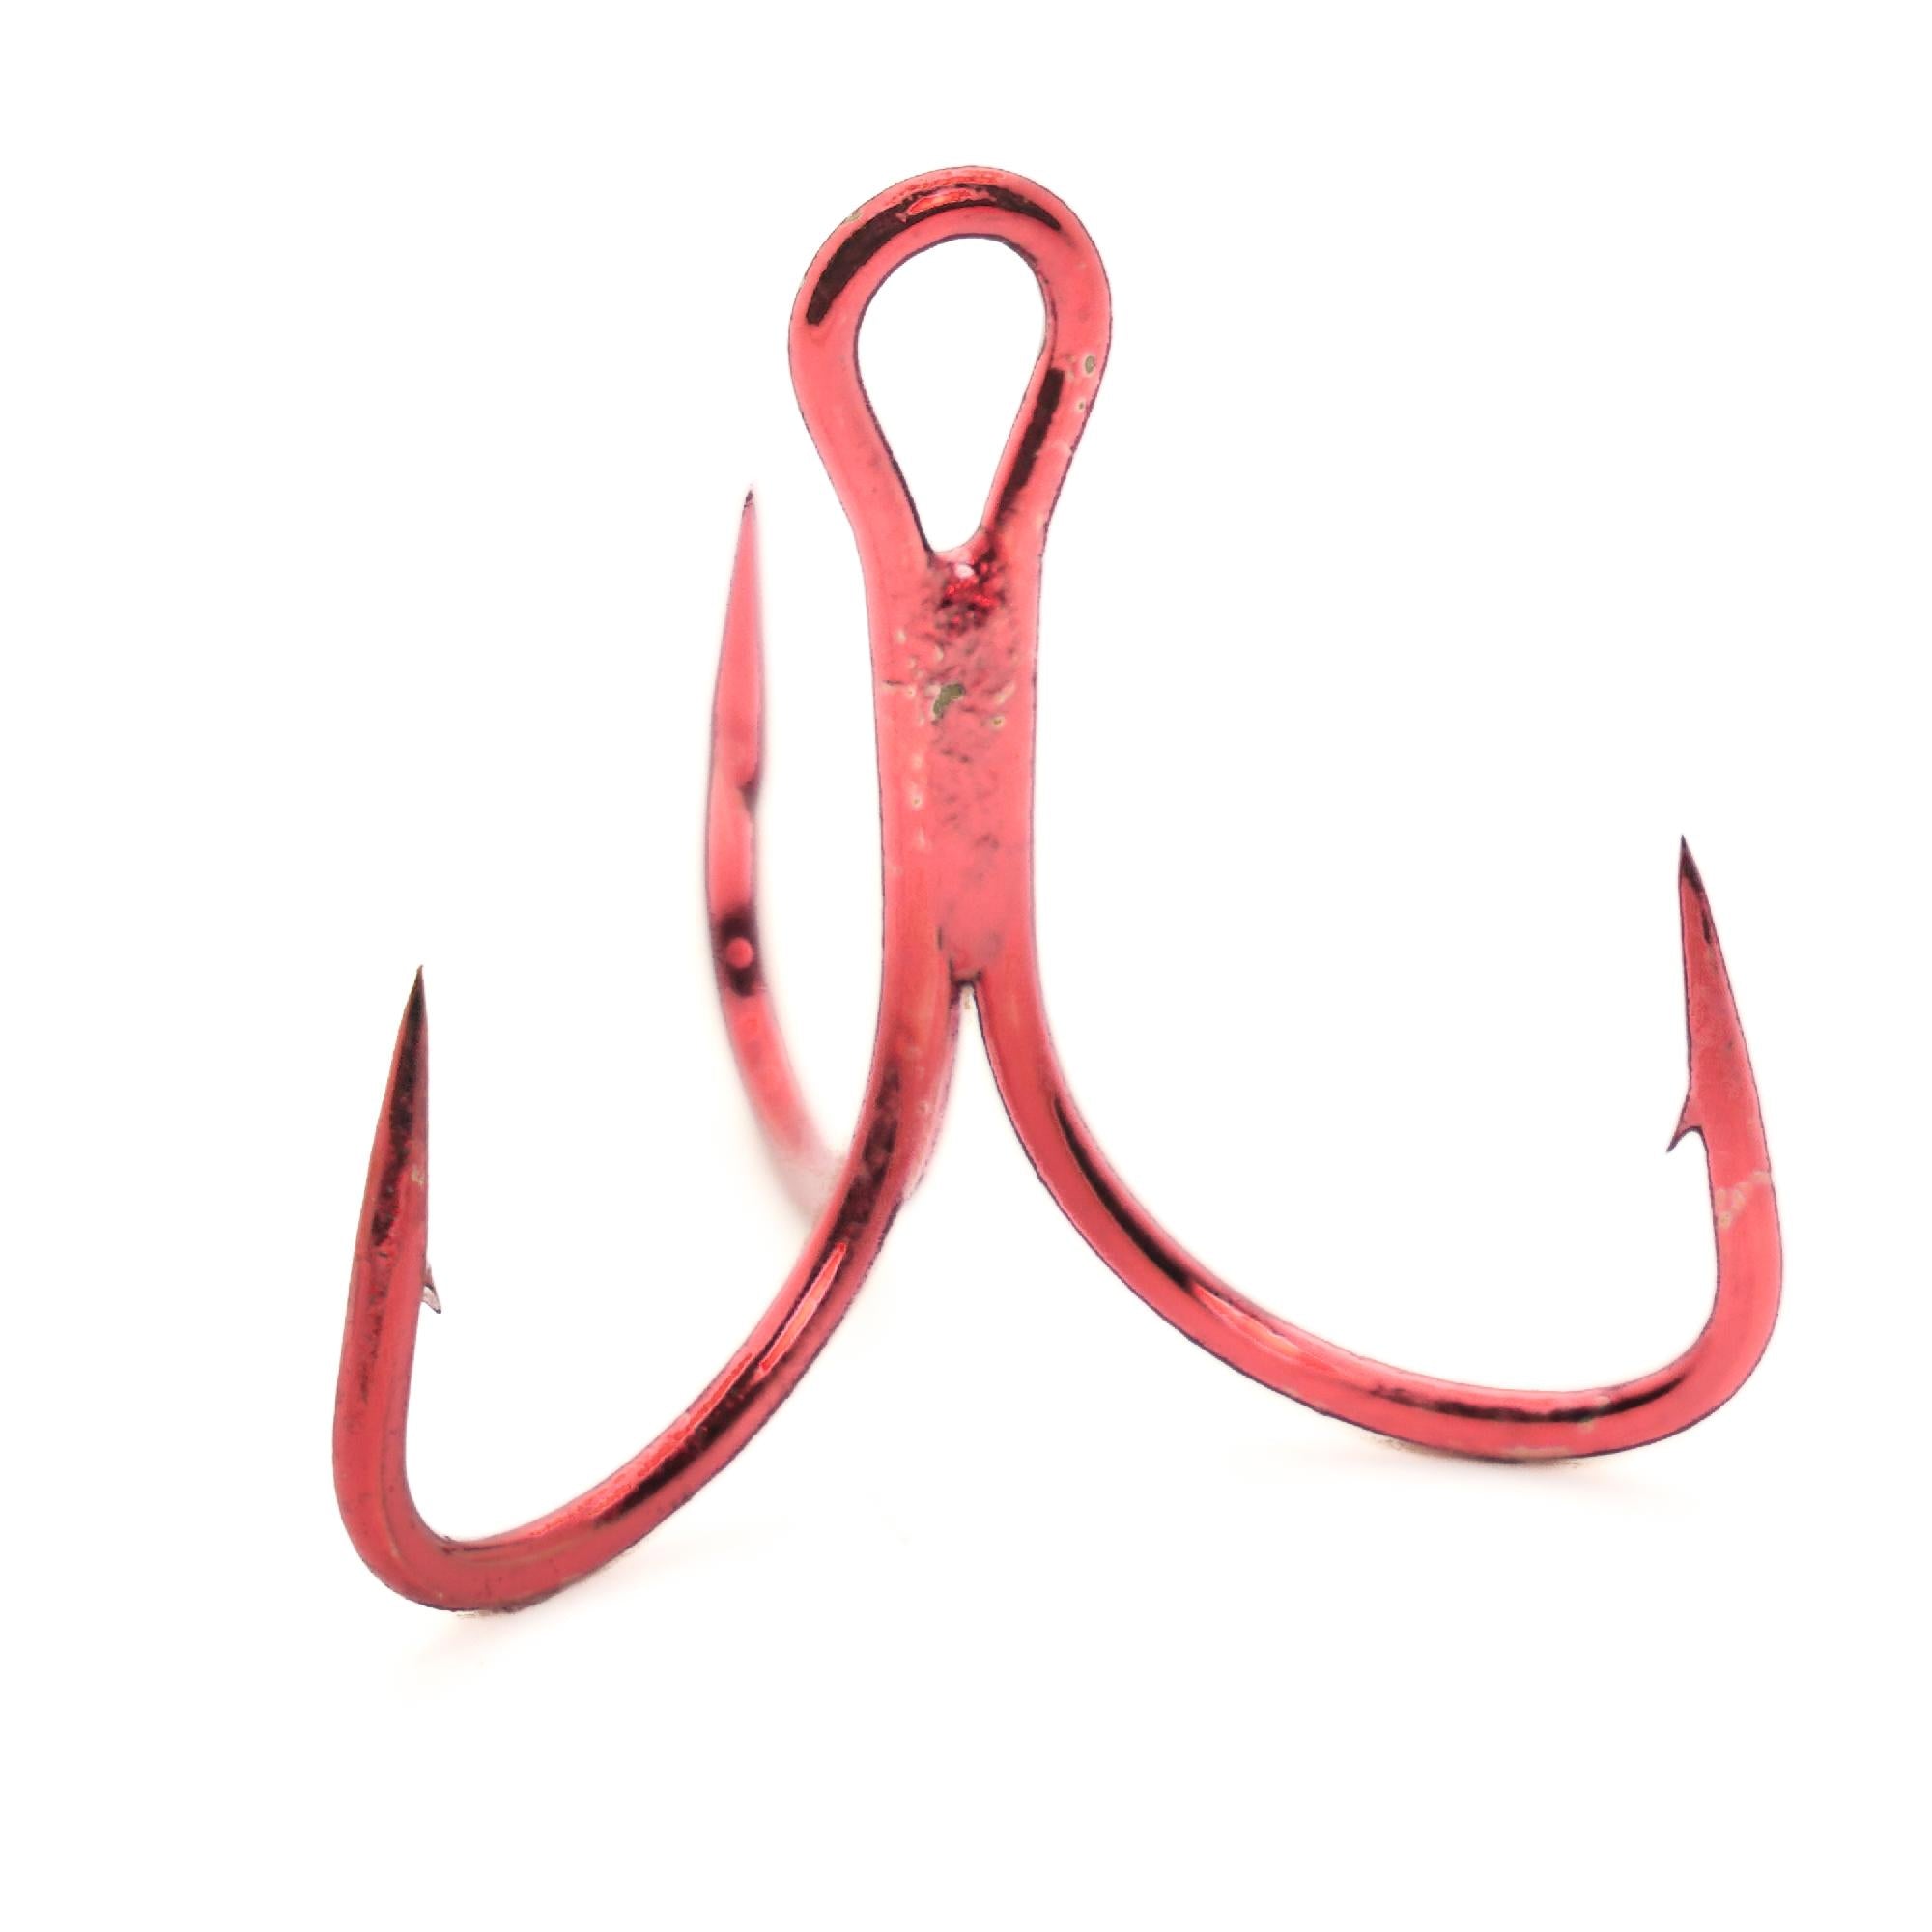 30 Mustad 3566 xtra strong HD 1/0 Treble hooks lure or plug replacement